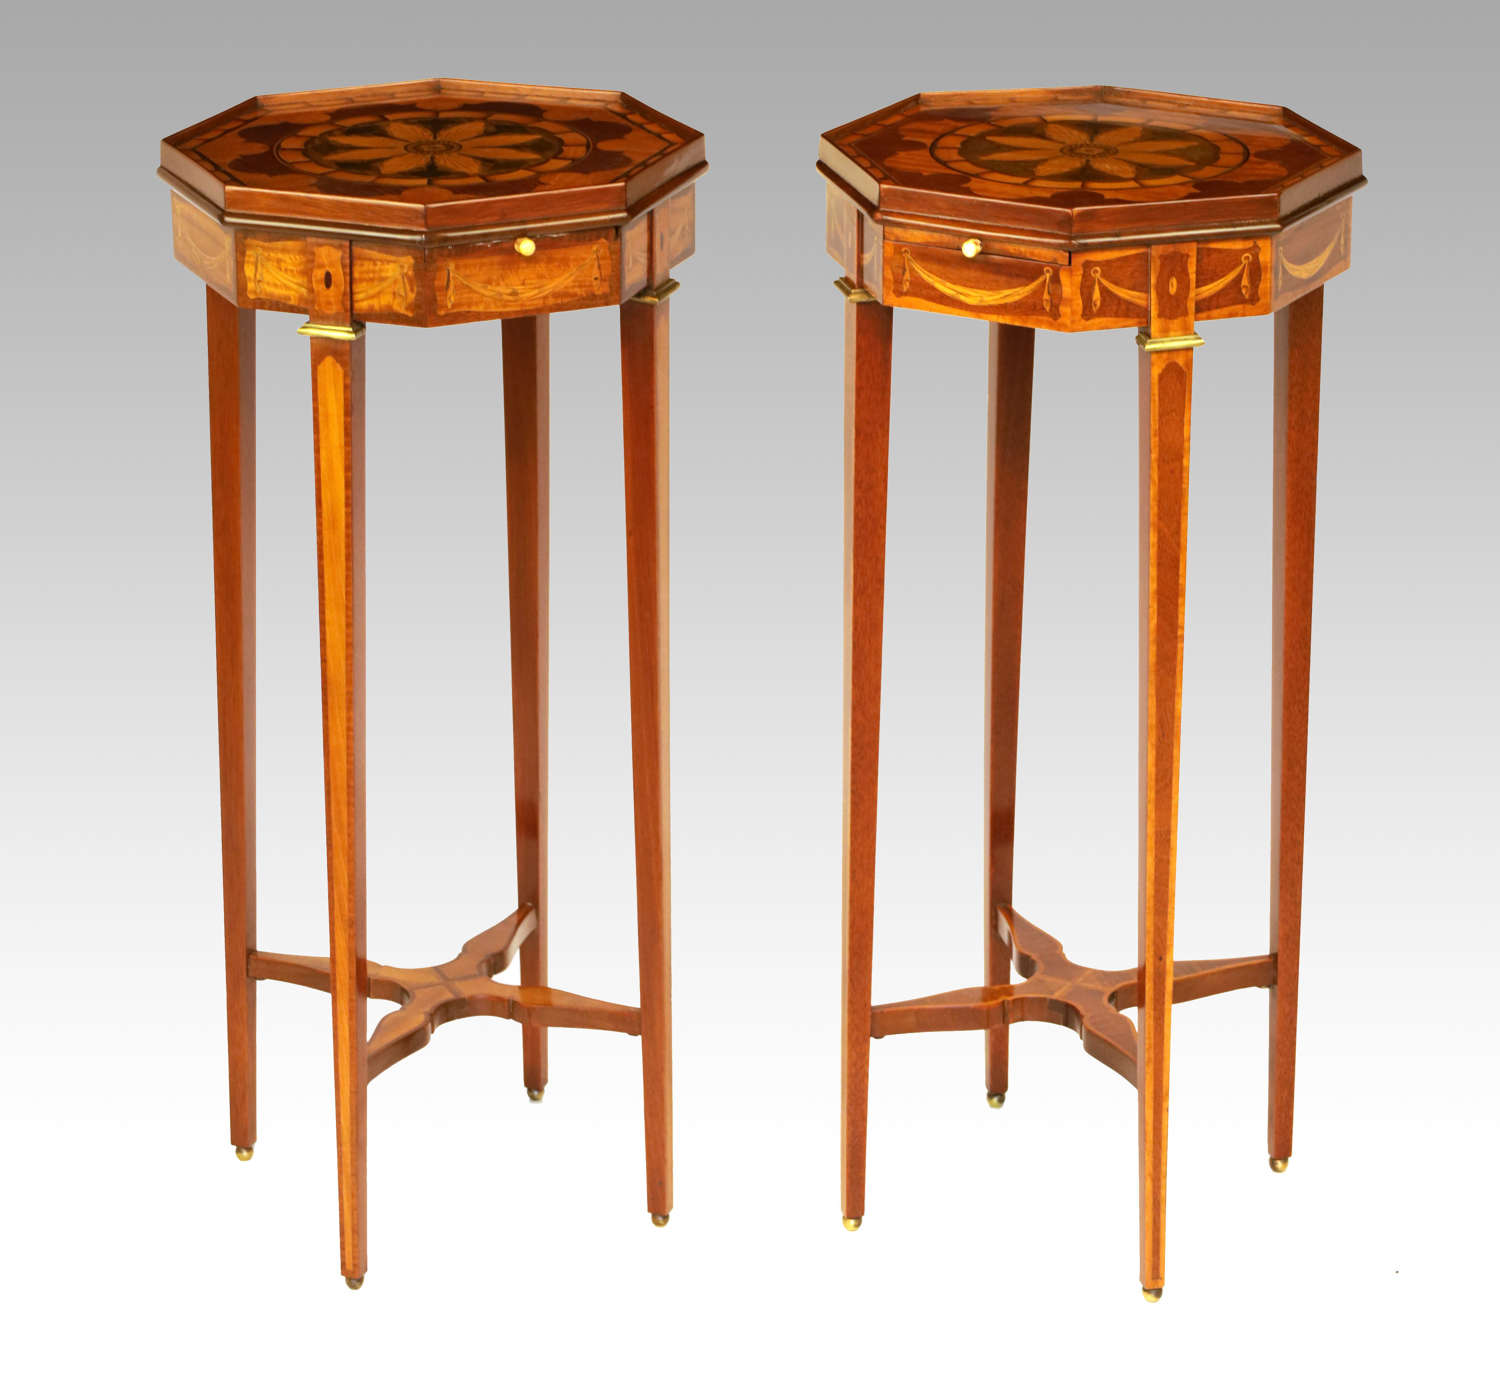 A Fine Quality Pair of Victorian Inlaid Mahogany Kettle stands